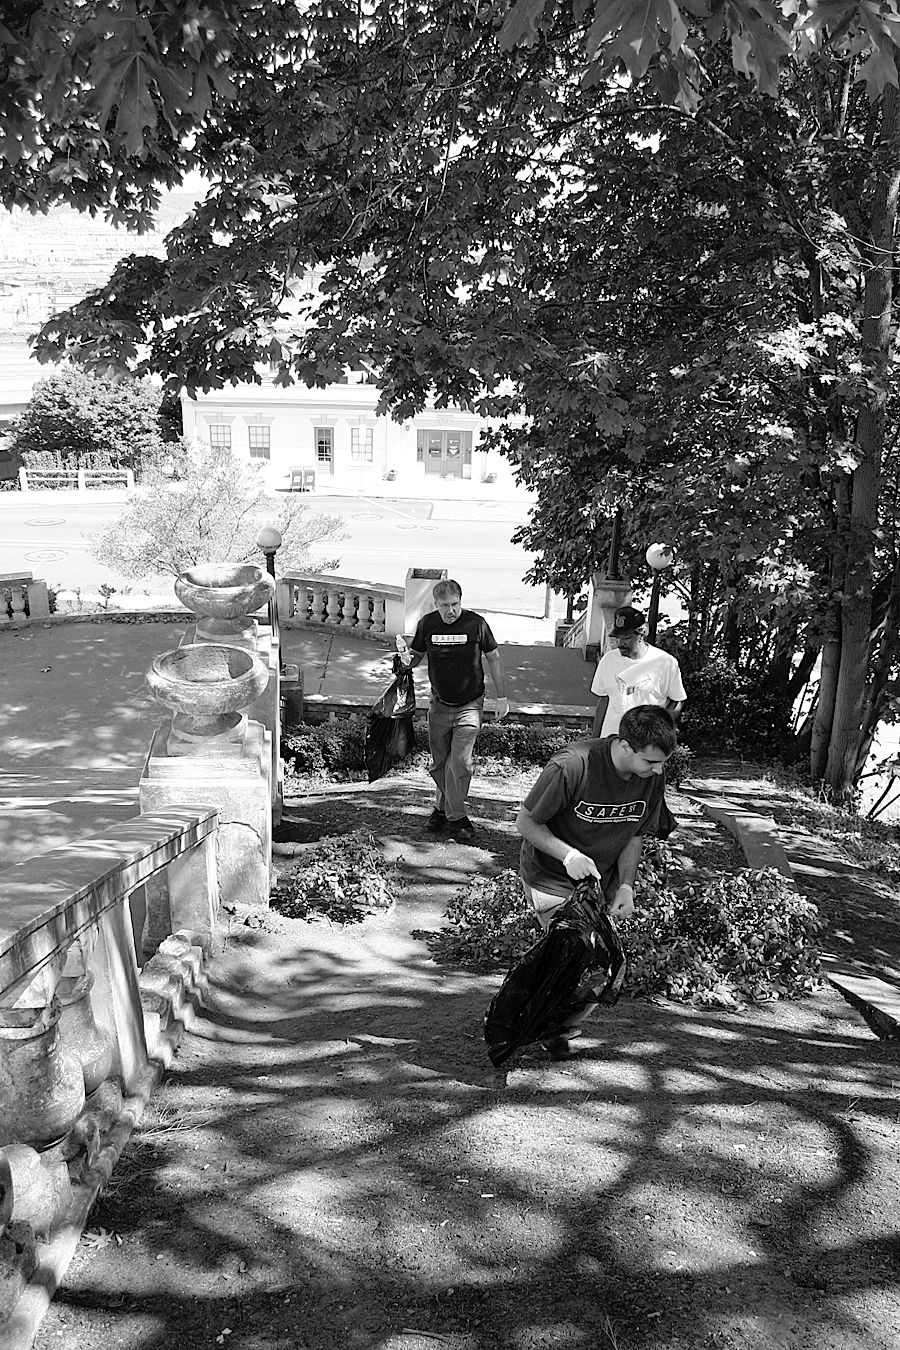 The group tackled the bushes near the Spanish Steps. (PHOTO BY TODD MATTHEWS)